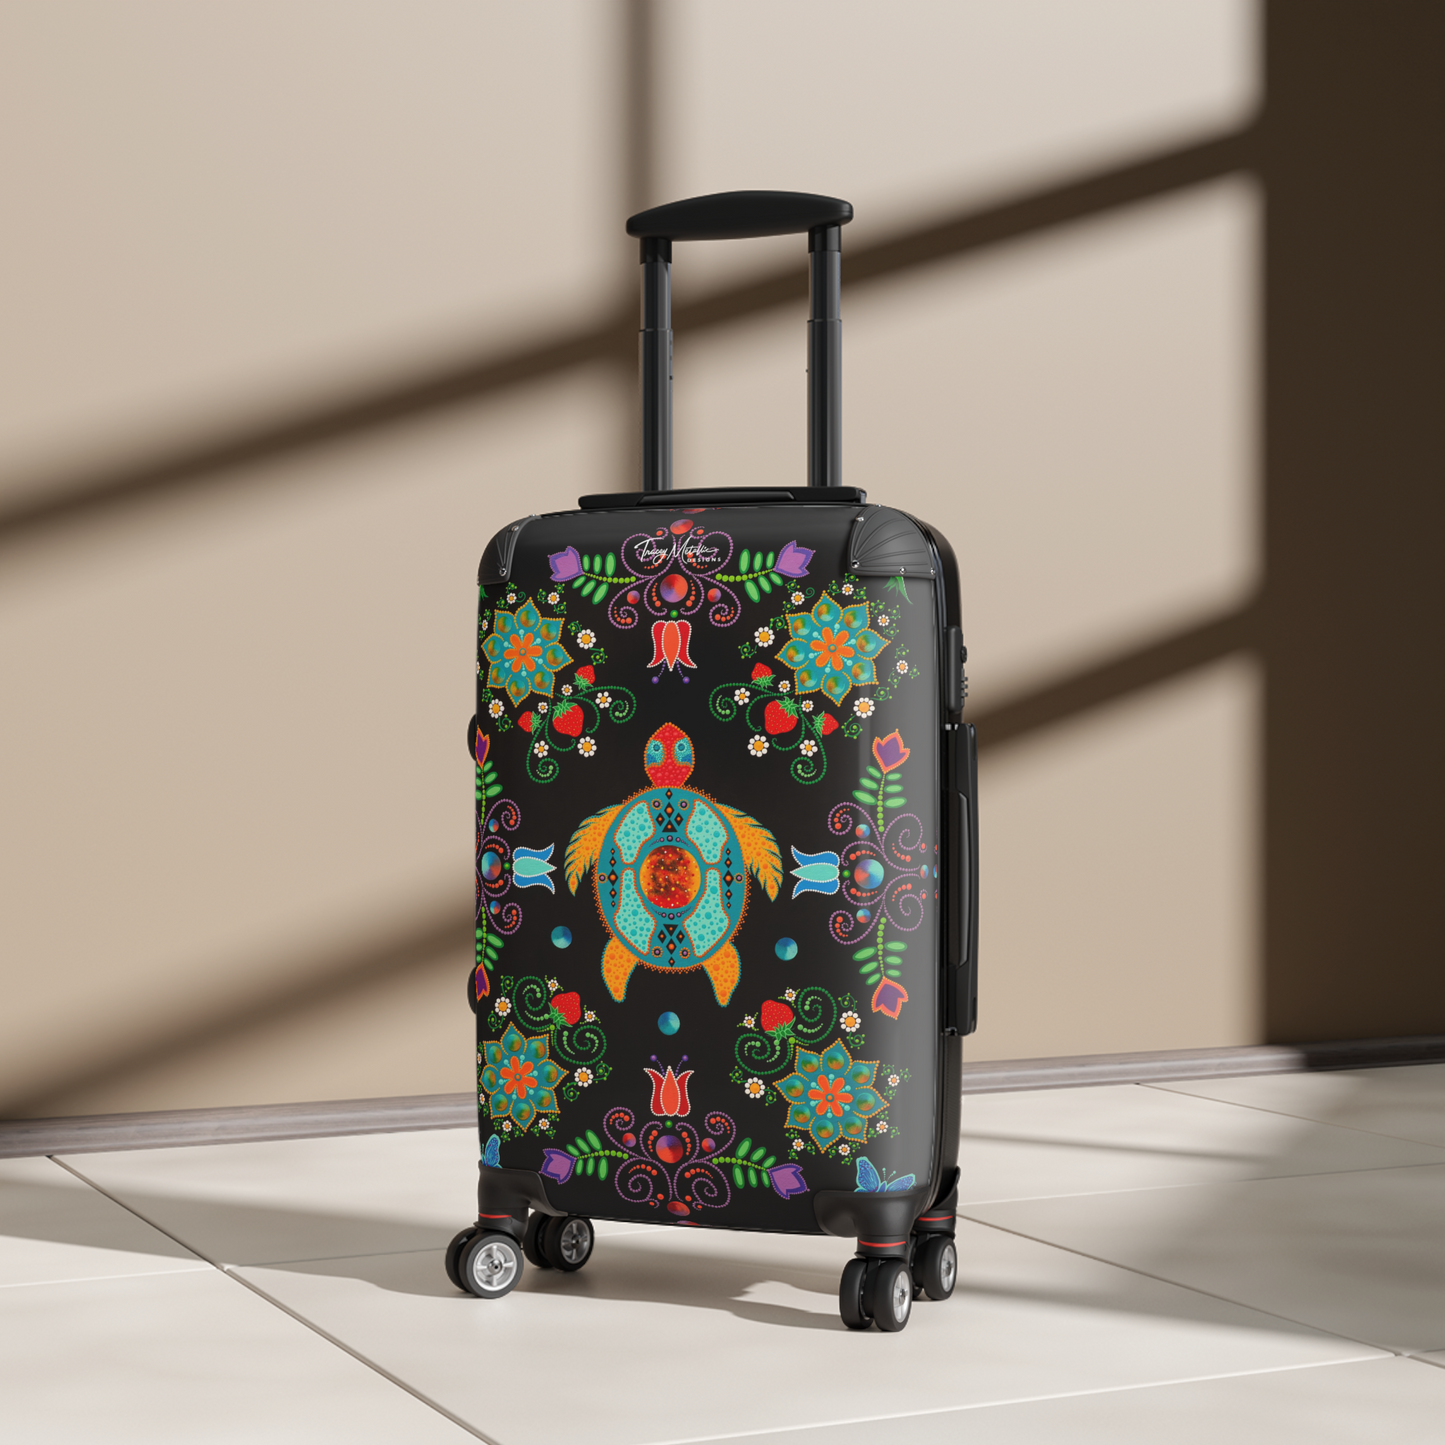 Turtle Carry On Luggage: Travel in Style